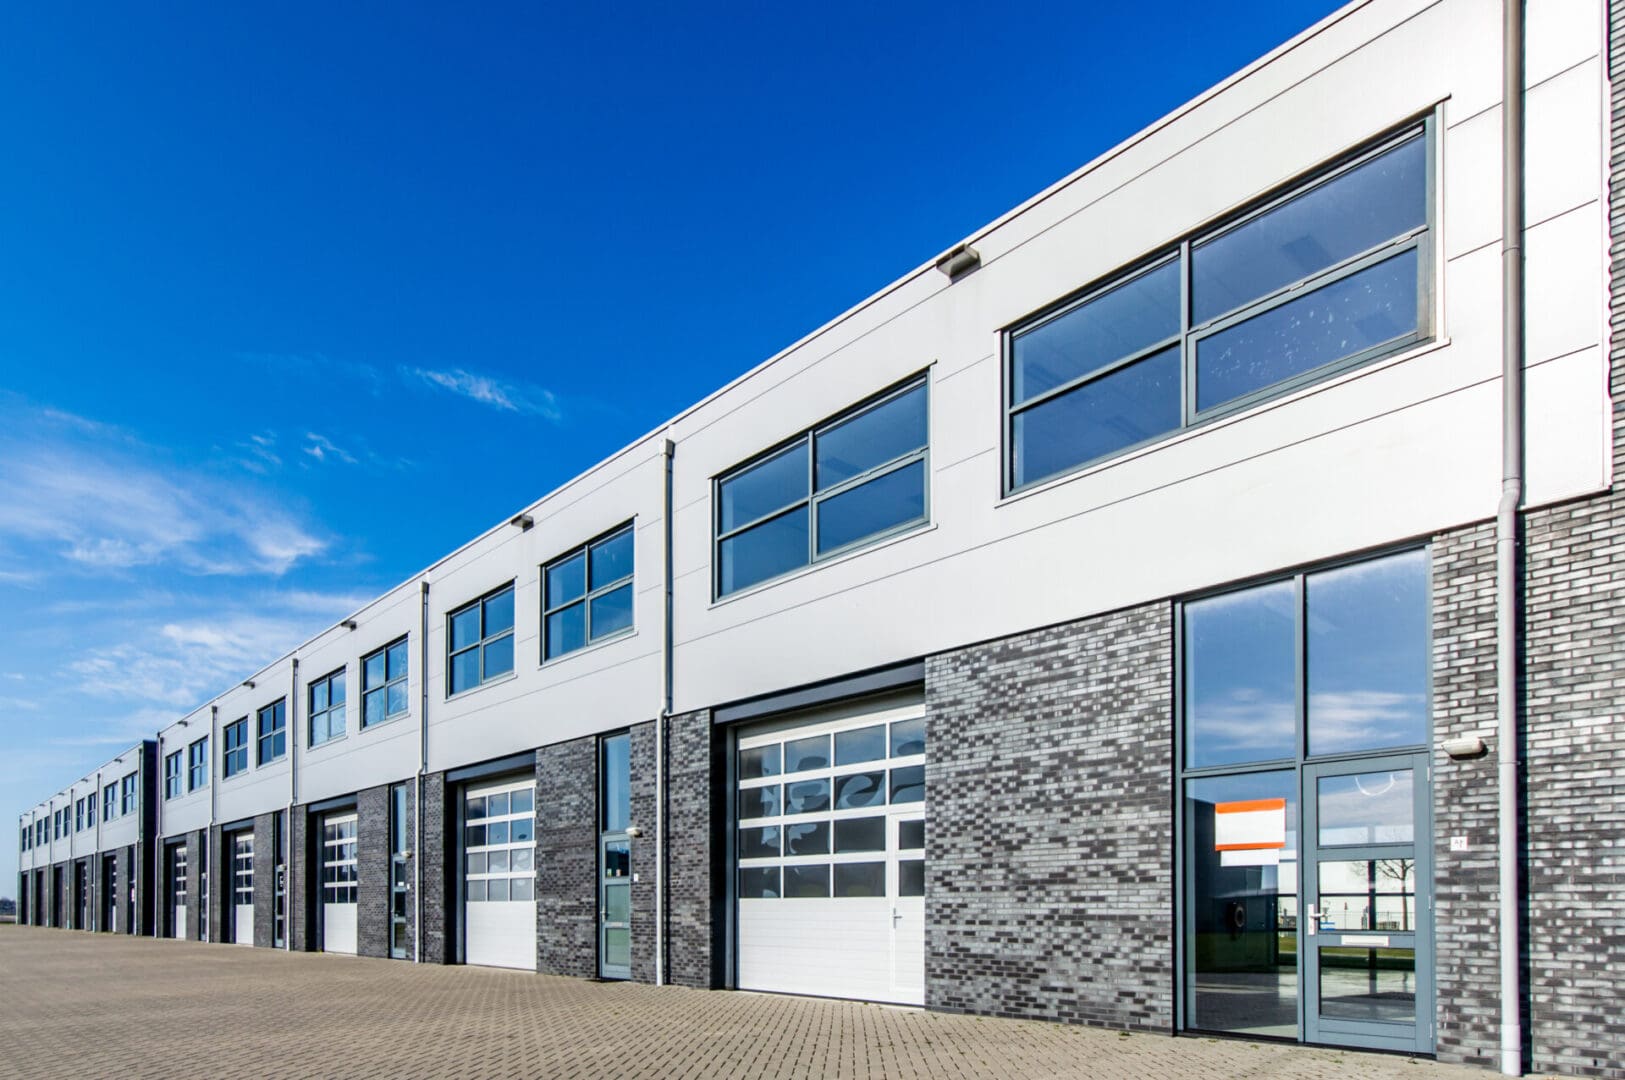 Modern,Industrial,Units,With,Loading,Doors,And,Blue,Sky